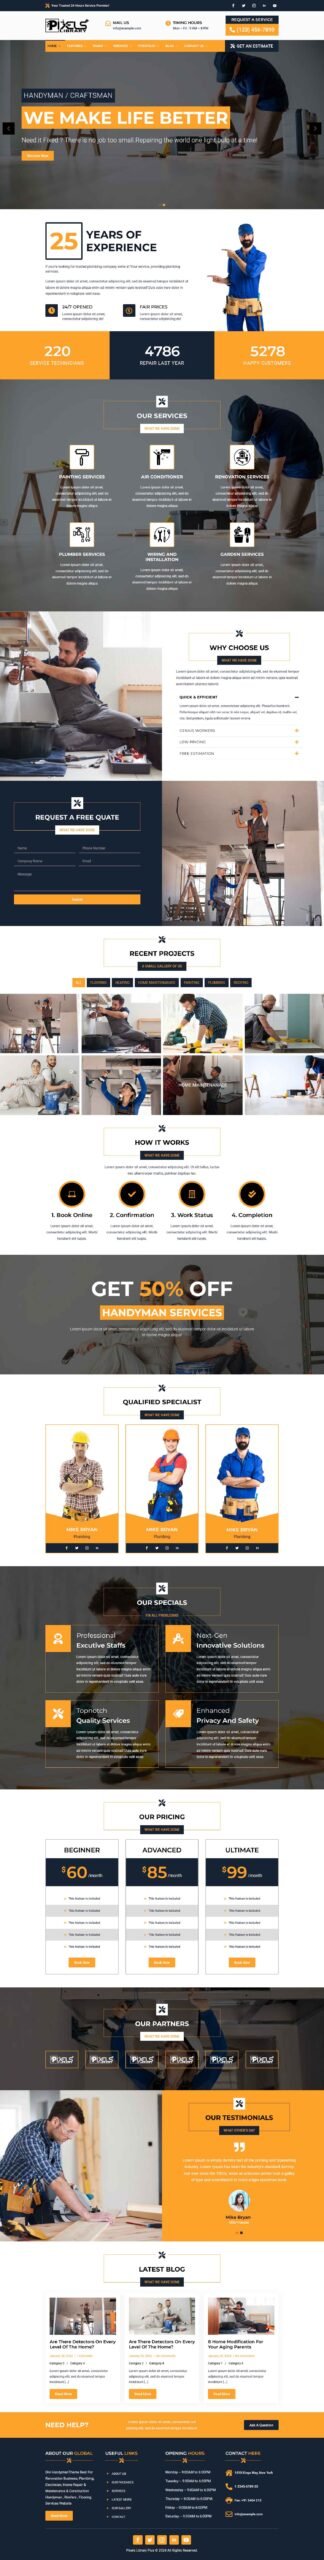 Breakdance Handyman Services Layout Pack